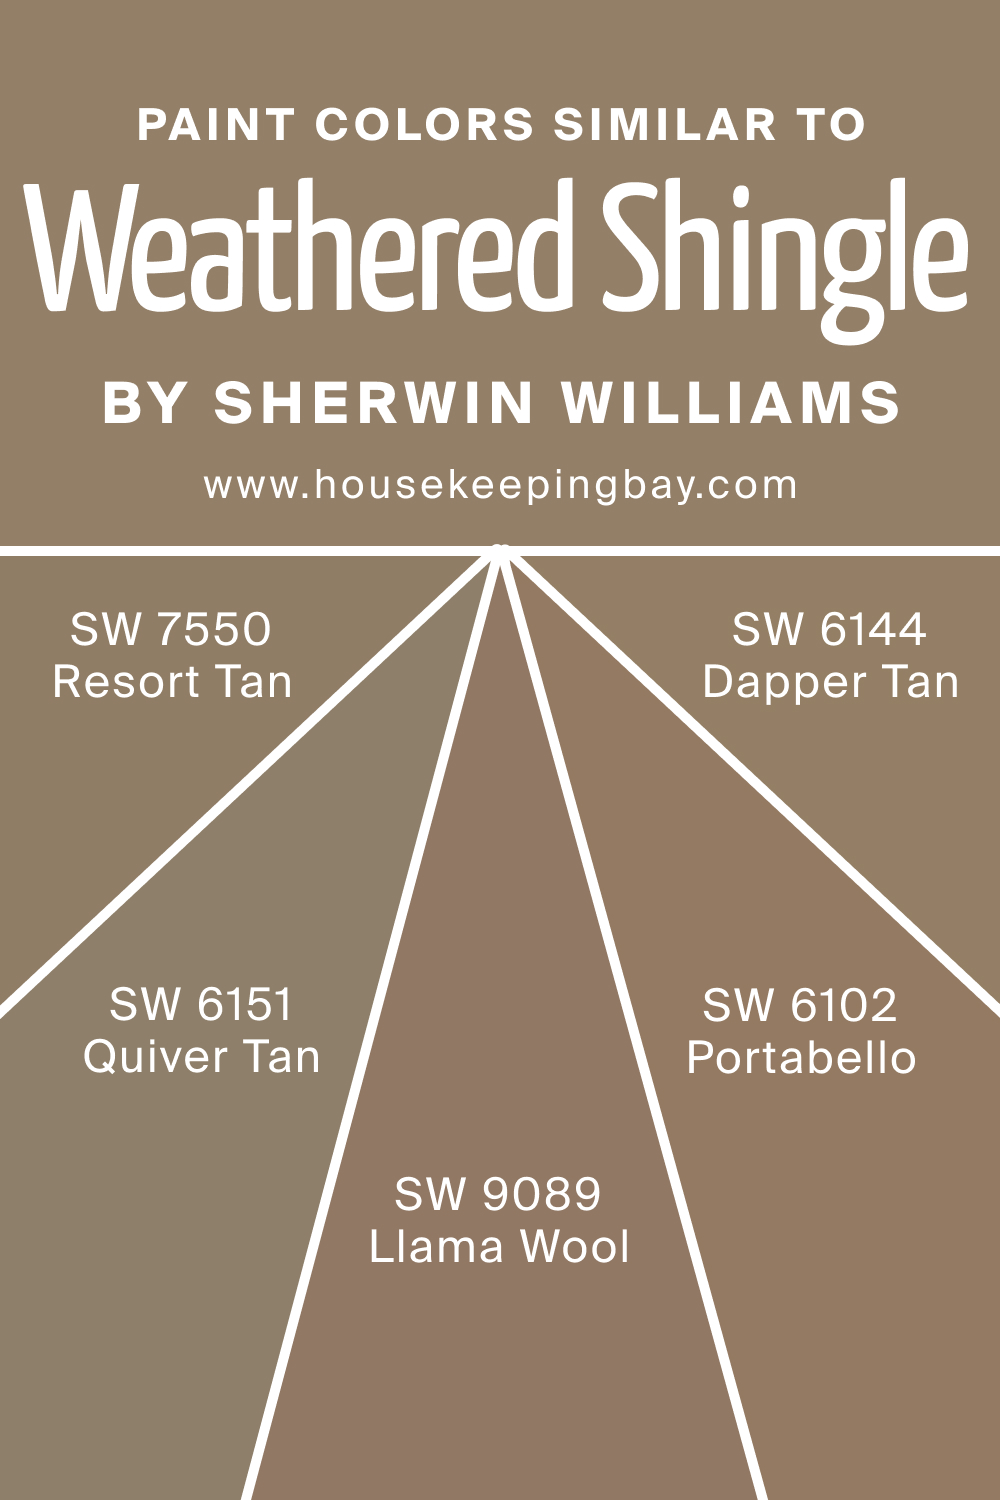 Paint Color Similar to SW 2841 Weathered Shingle by Sherwin Williams